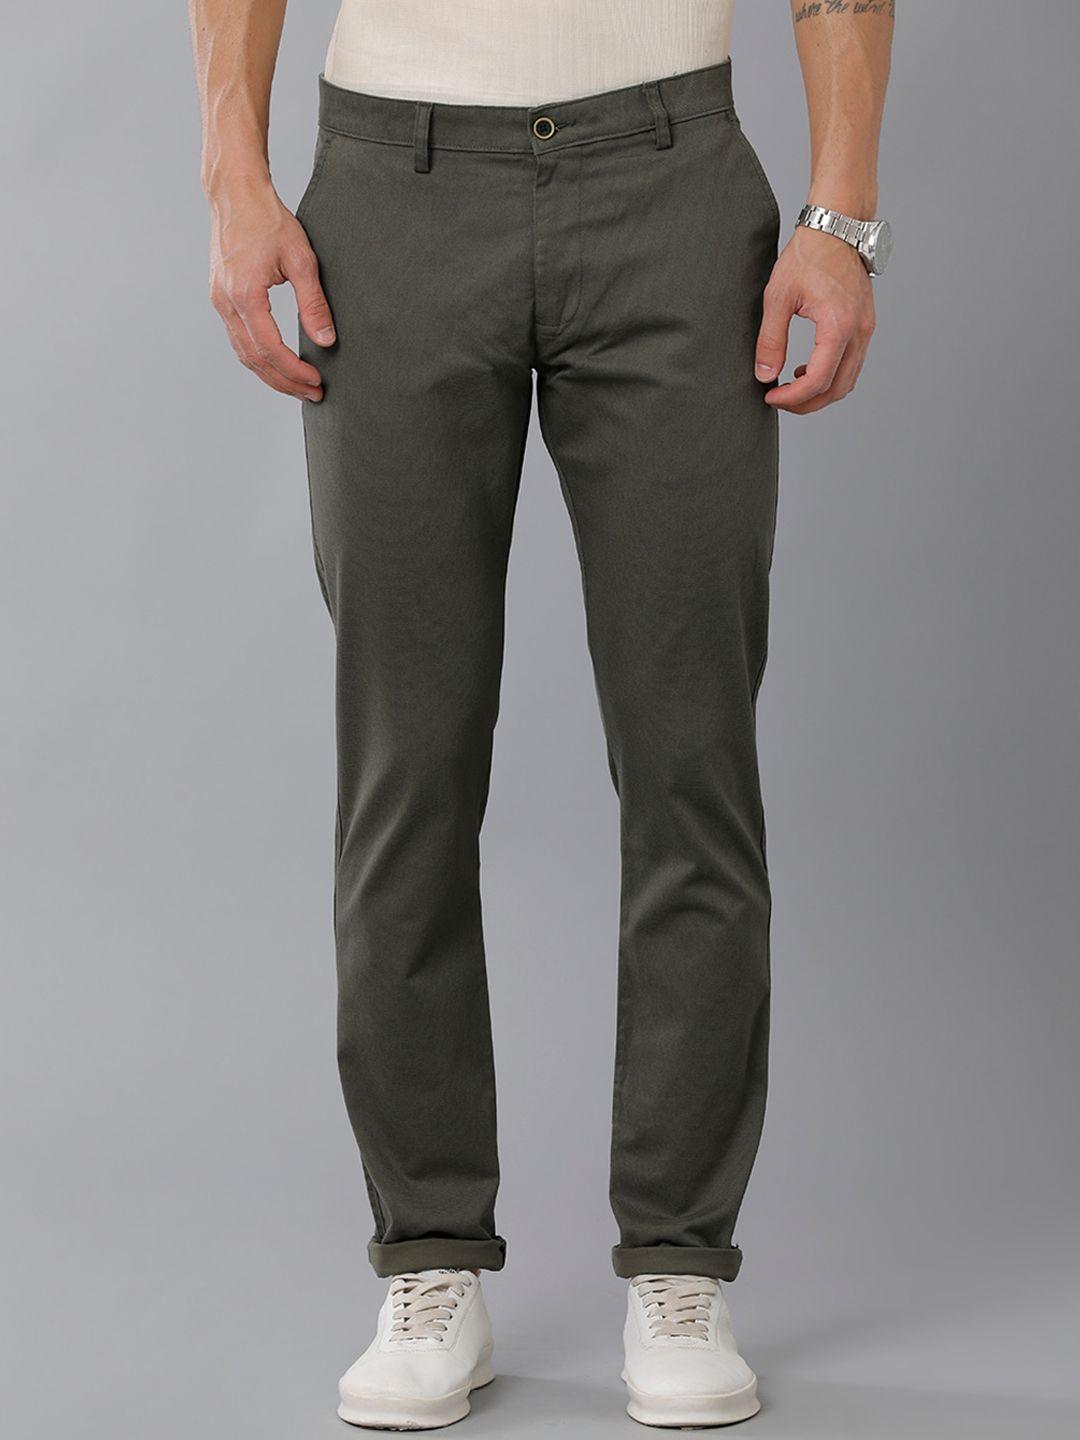 classic-polo-men-classic-slim-fit-chinos-mid-rise-trousers